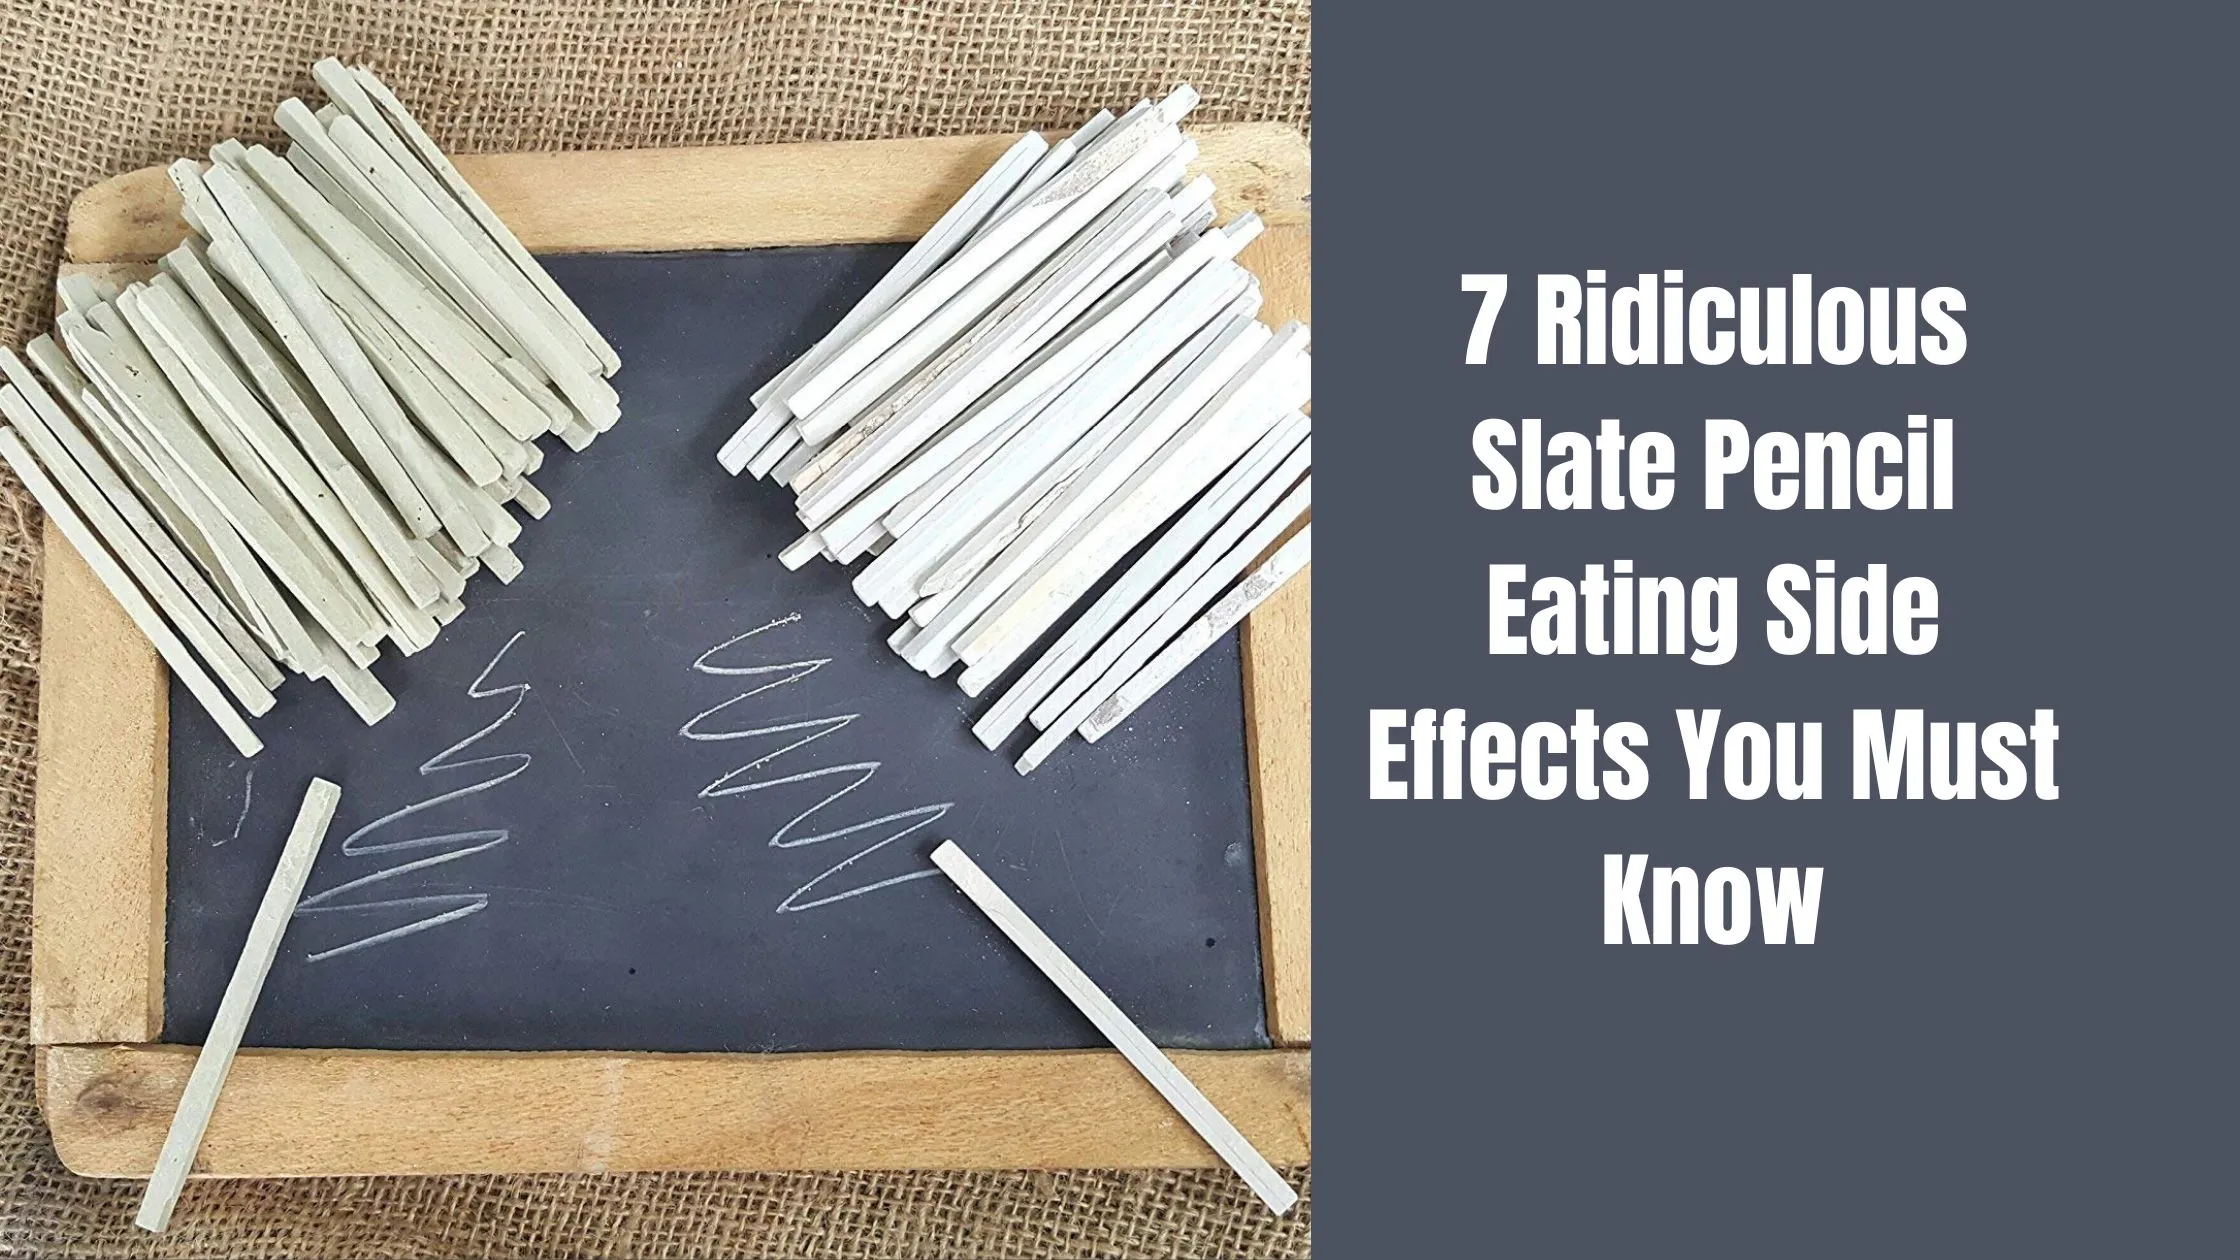 Slate Pencil Eating Side Effects